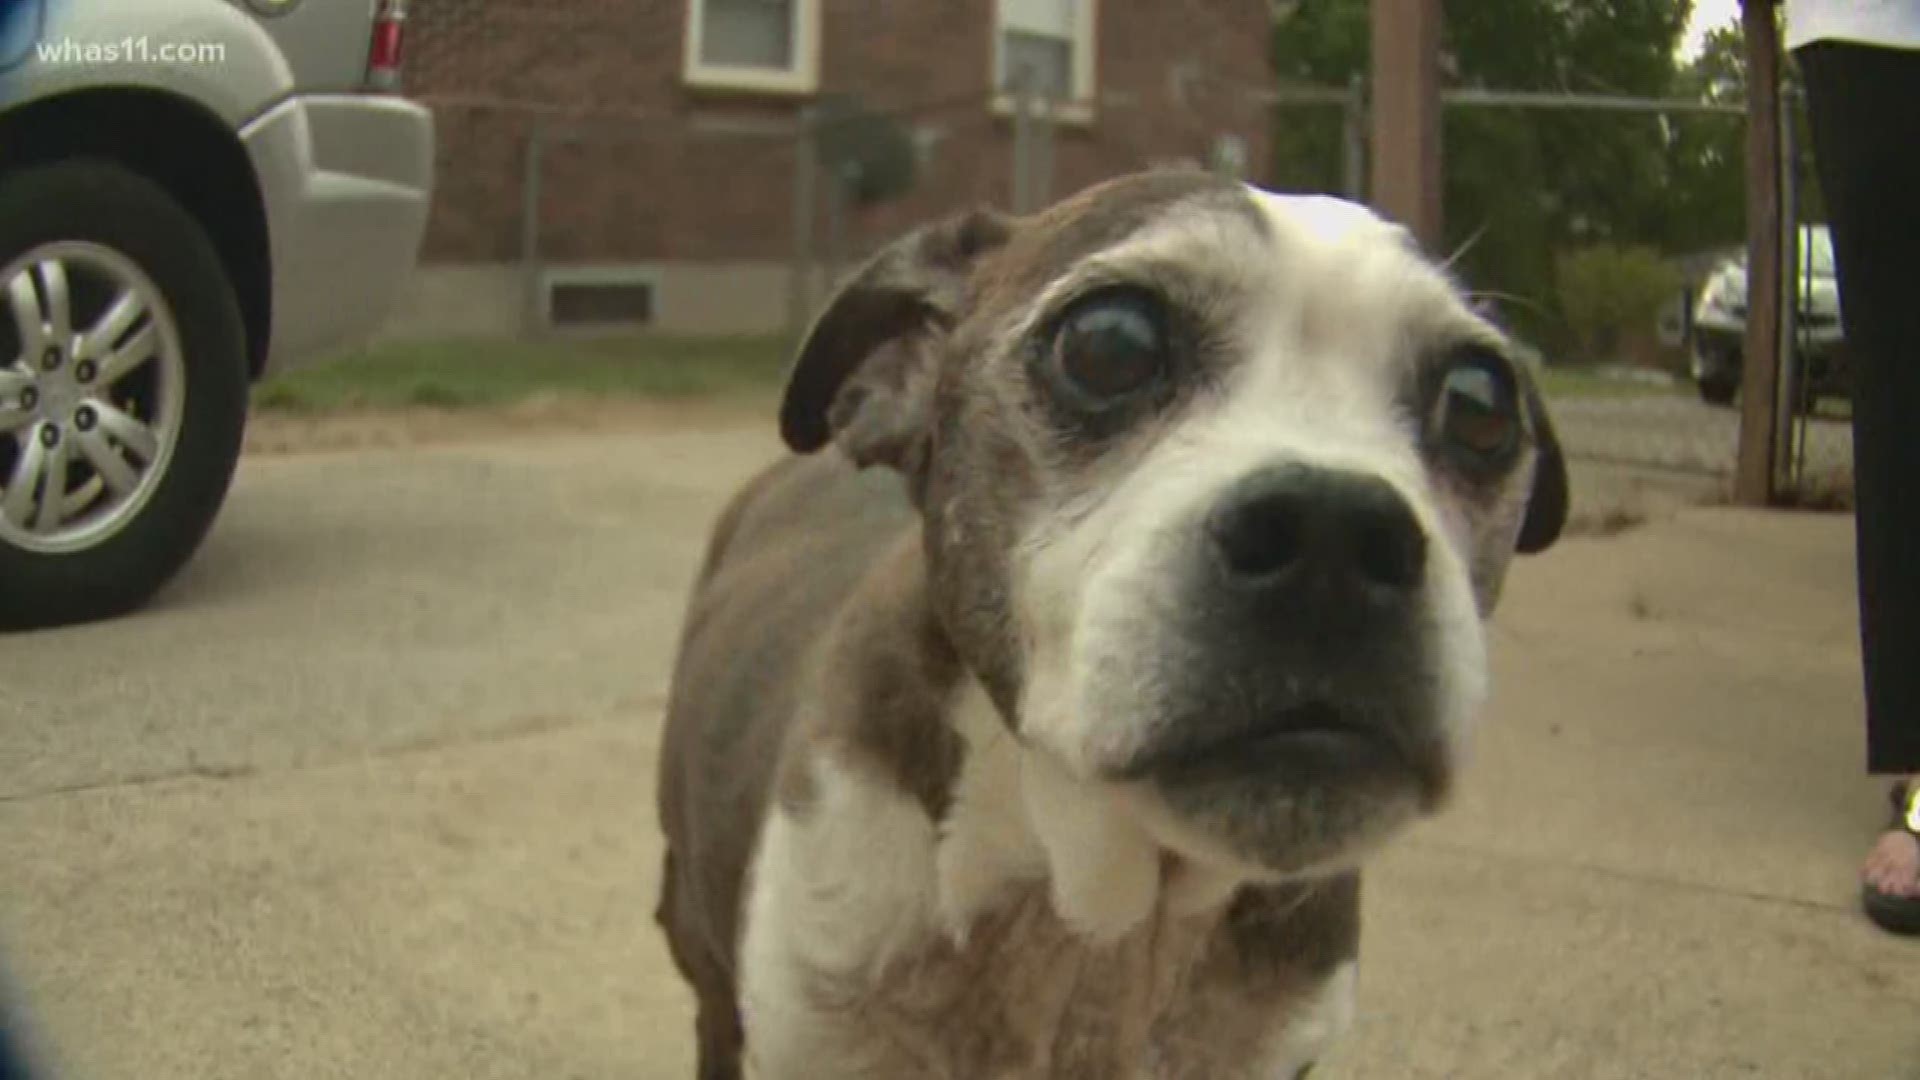 The program takes dogs and cats out of shelters where they might otherwise be euthanized.